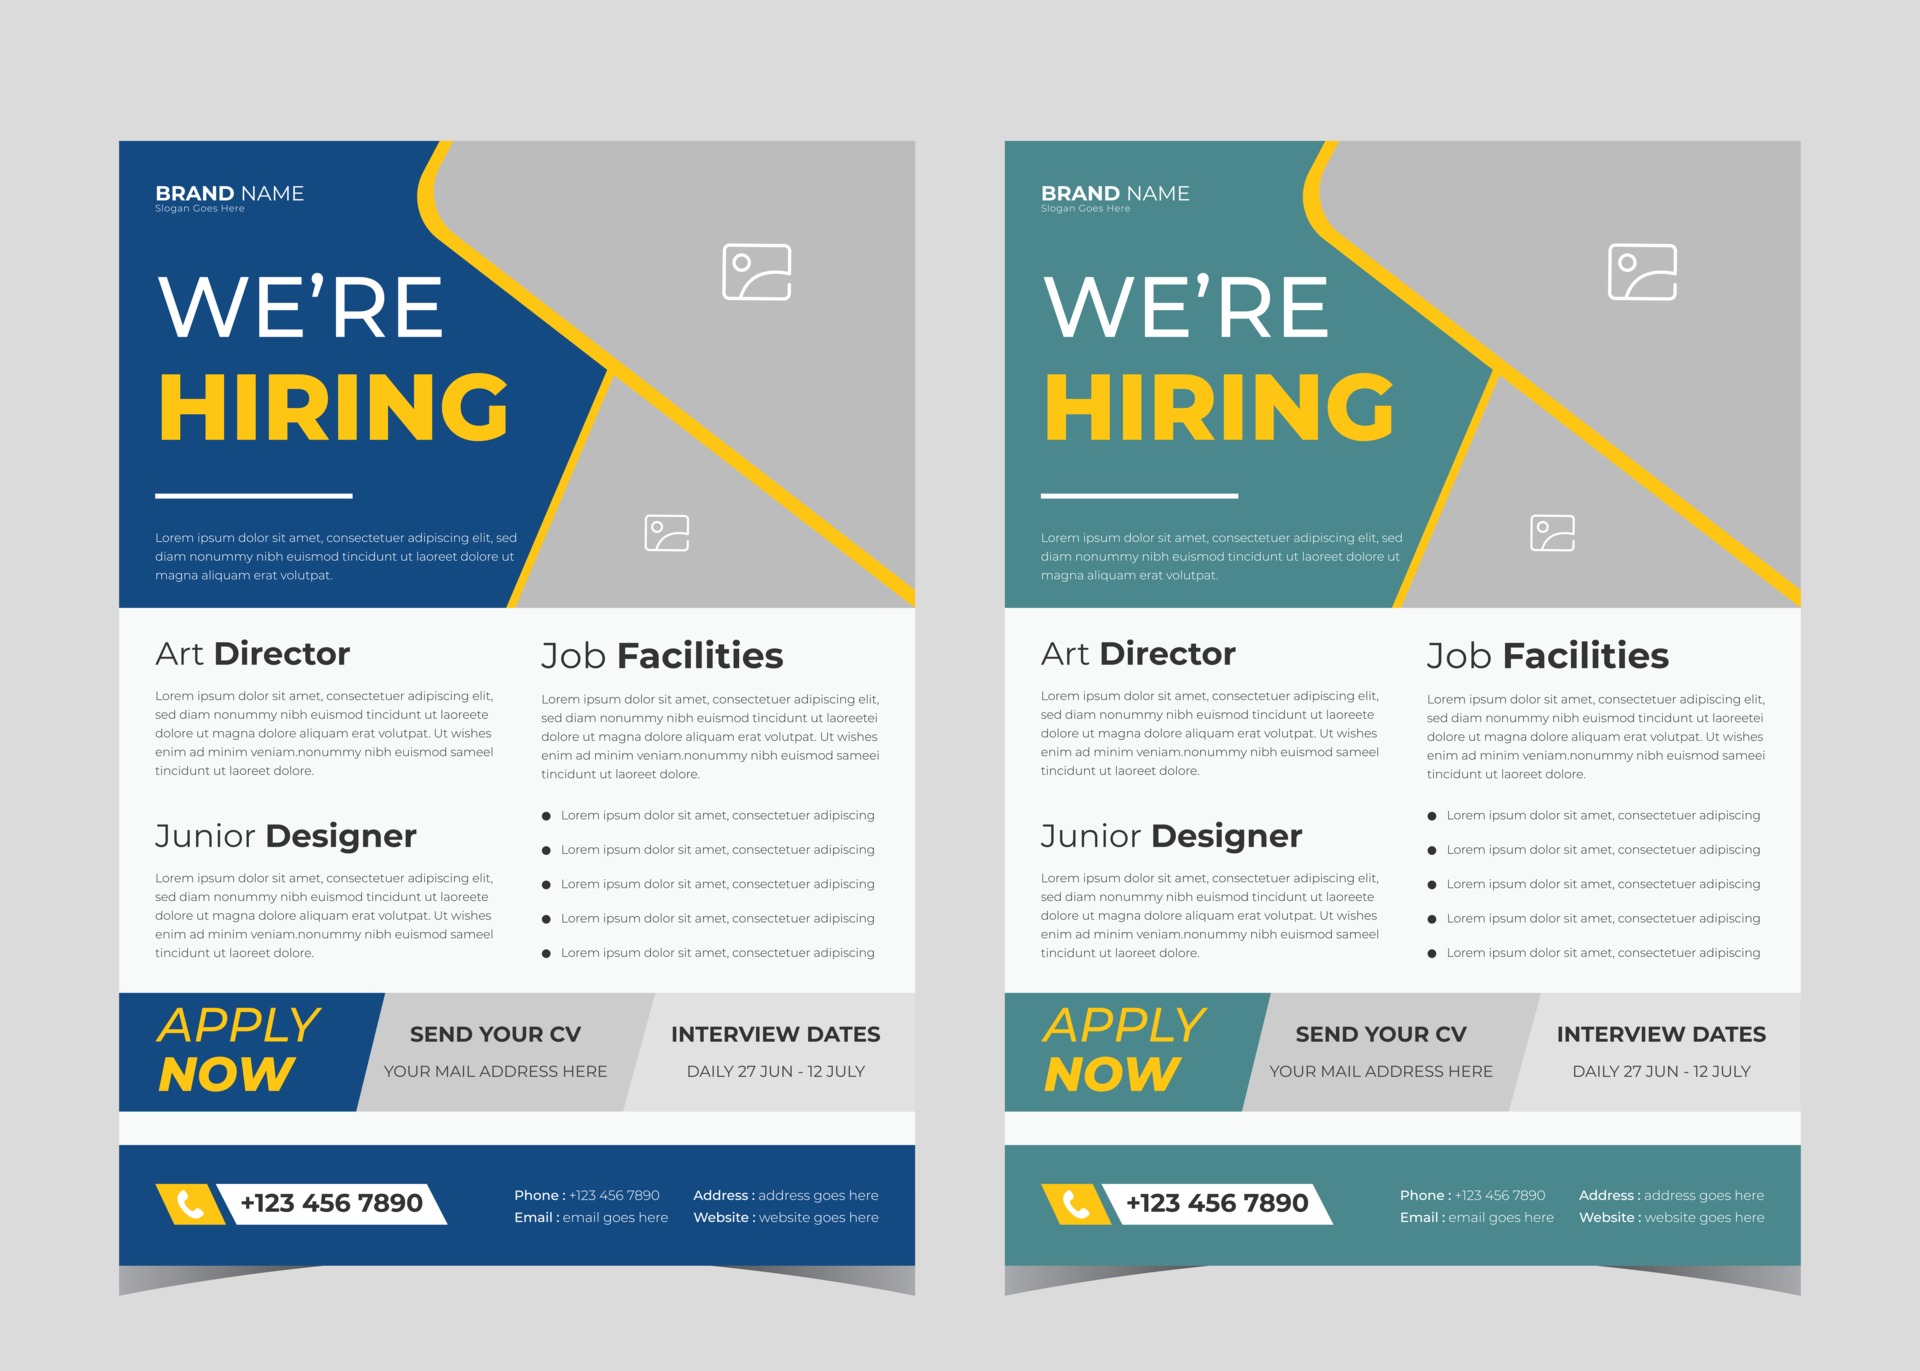 We are hiring flyer design. We are hiring poster template. Job With Career Flyer Template